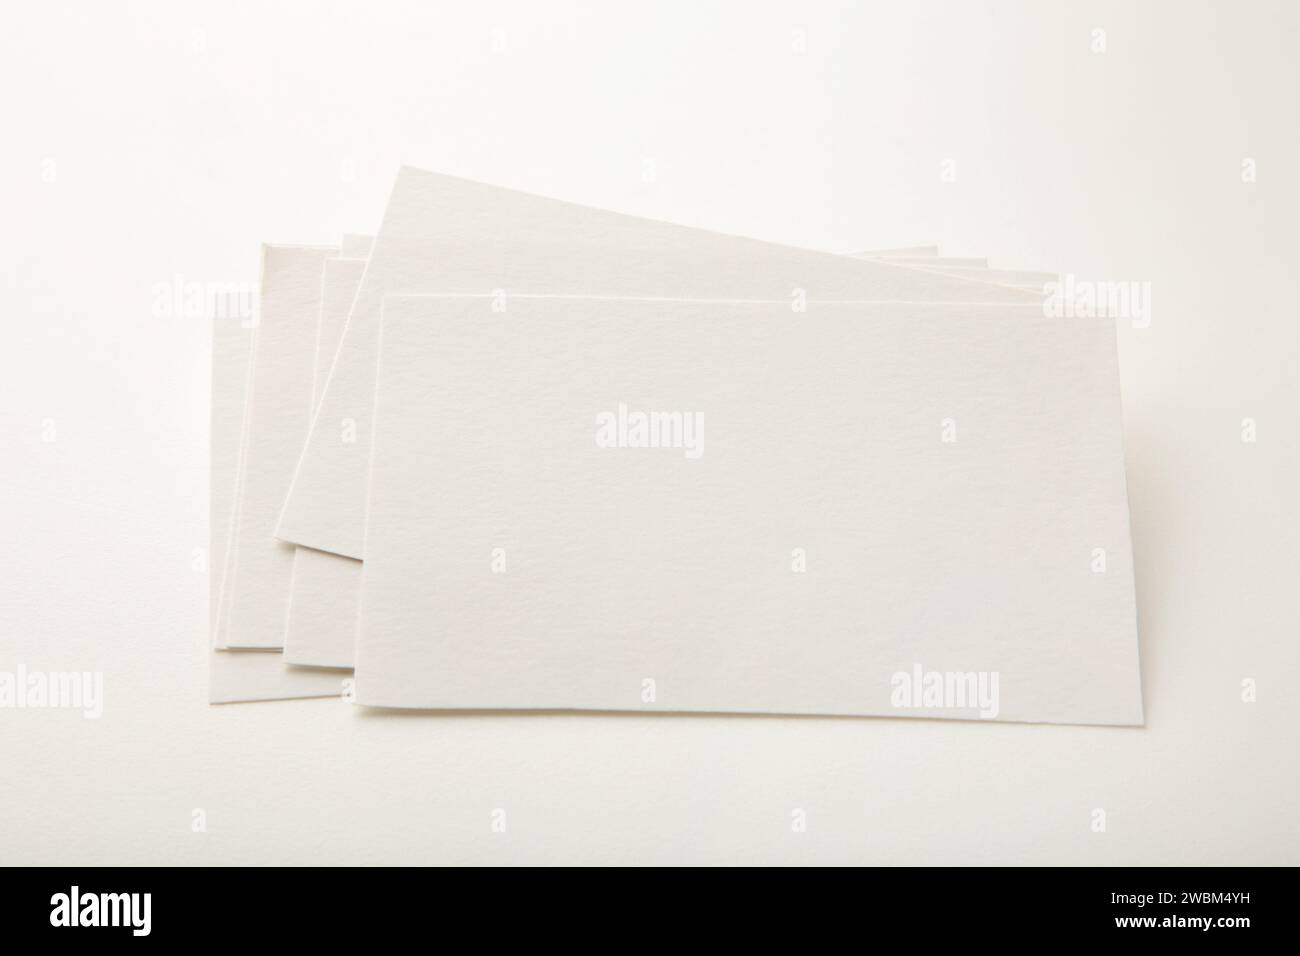 Blank white business cards on white paper background. Mockup for branding identity. Template for graphic designers portfolios. Stock Photo